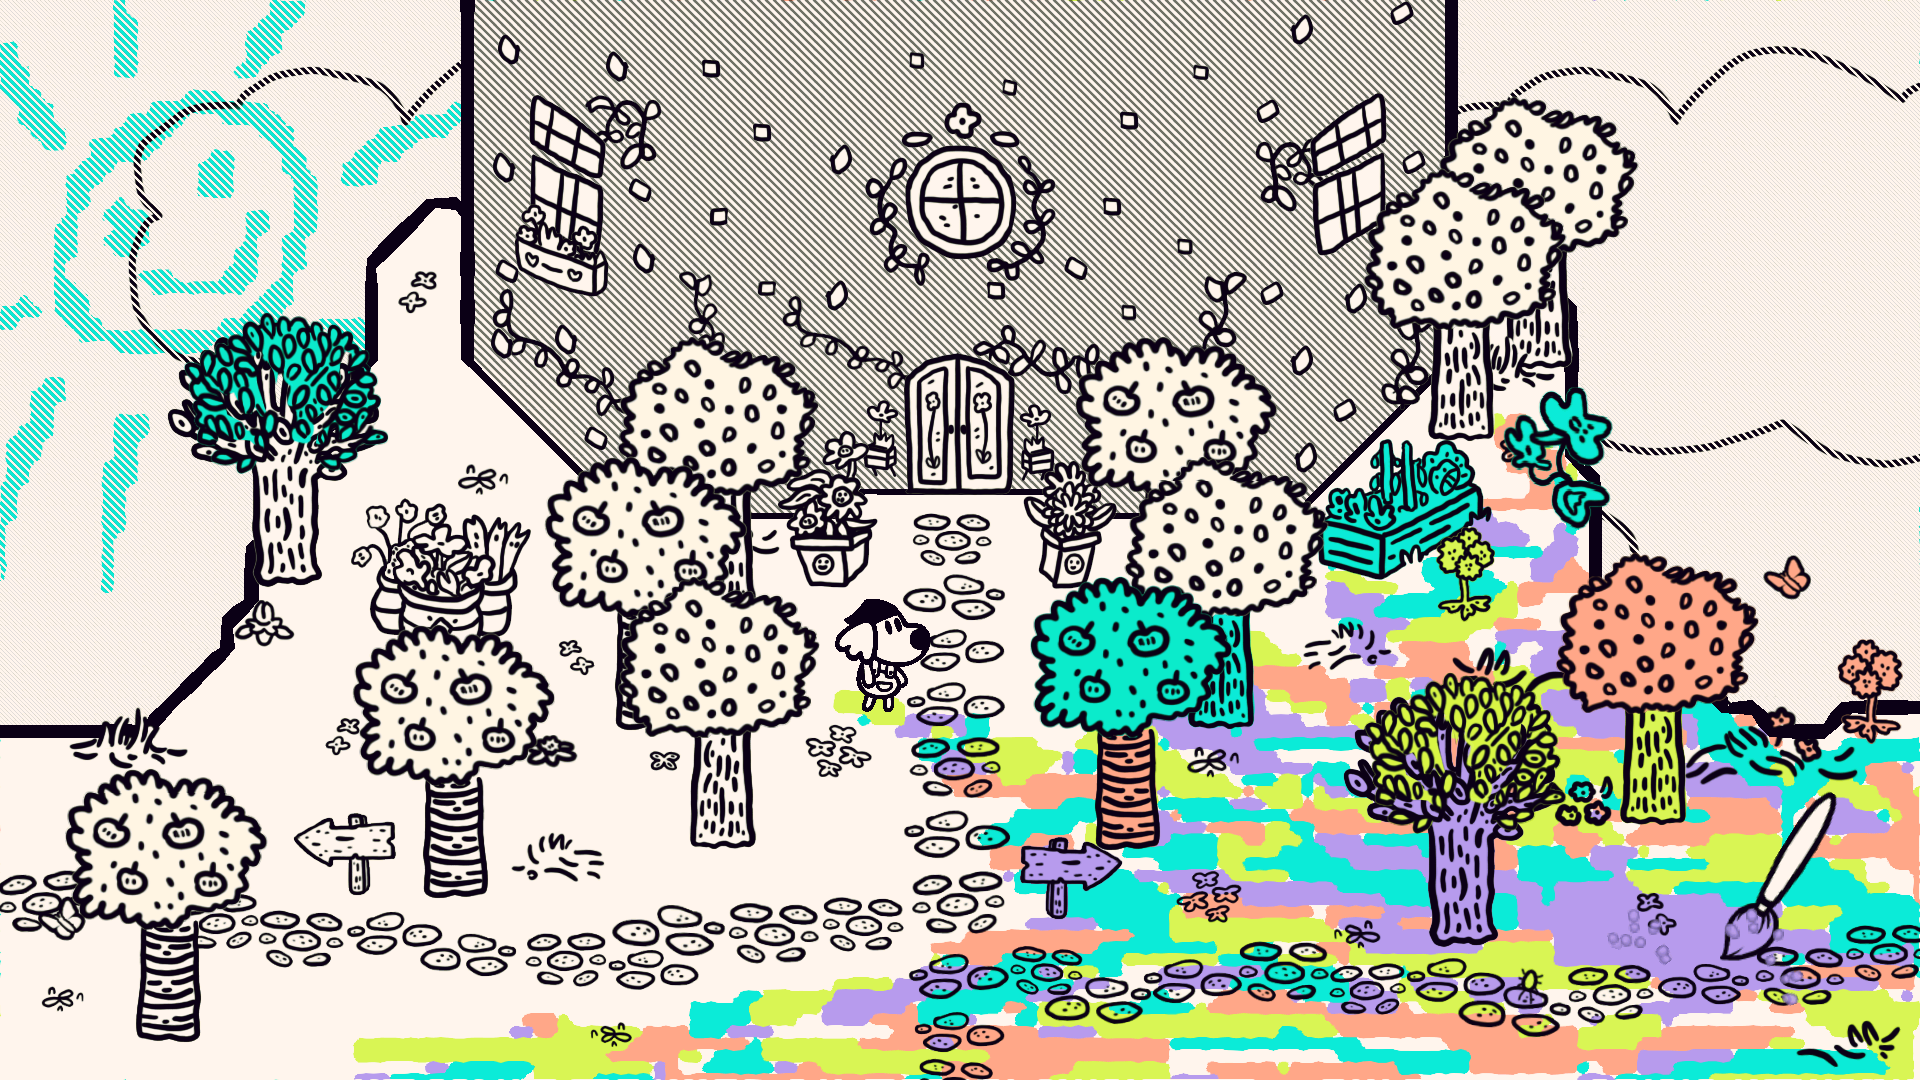 A screenshot from Chicory in front of the Wielder Tower where the bottom portion is painted a bunch of different colors